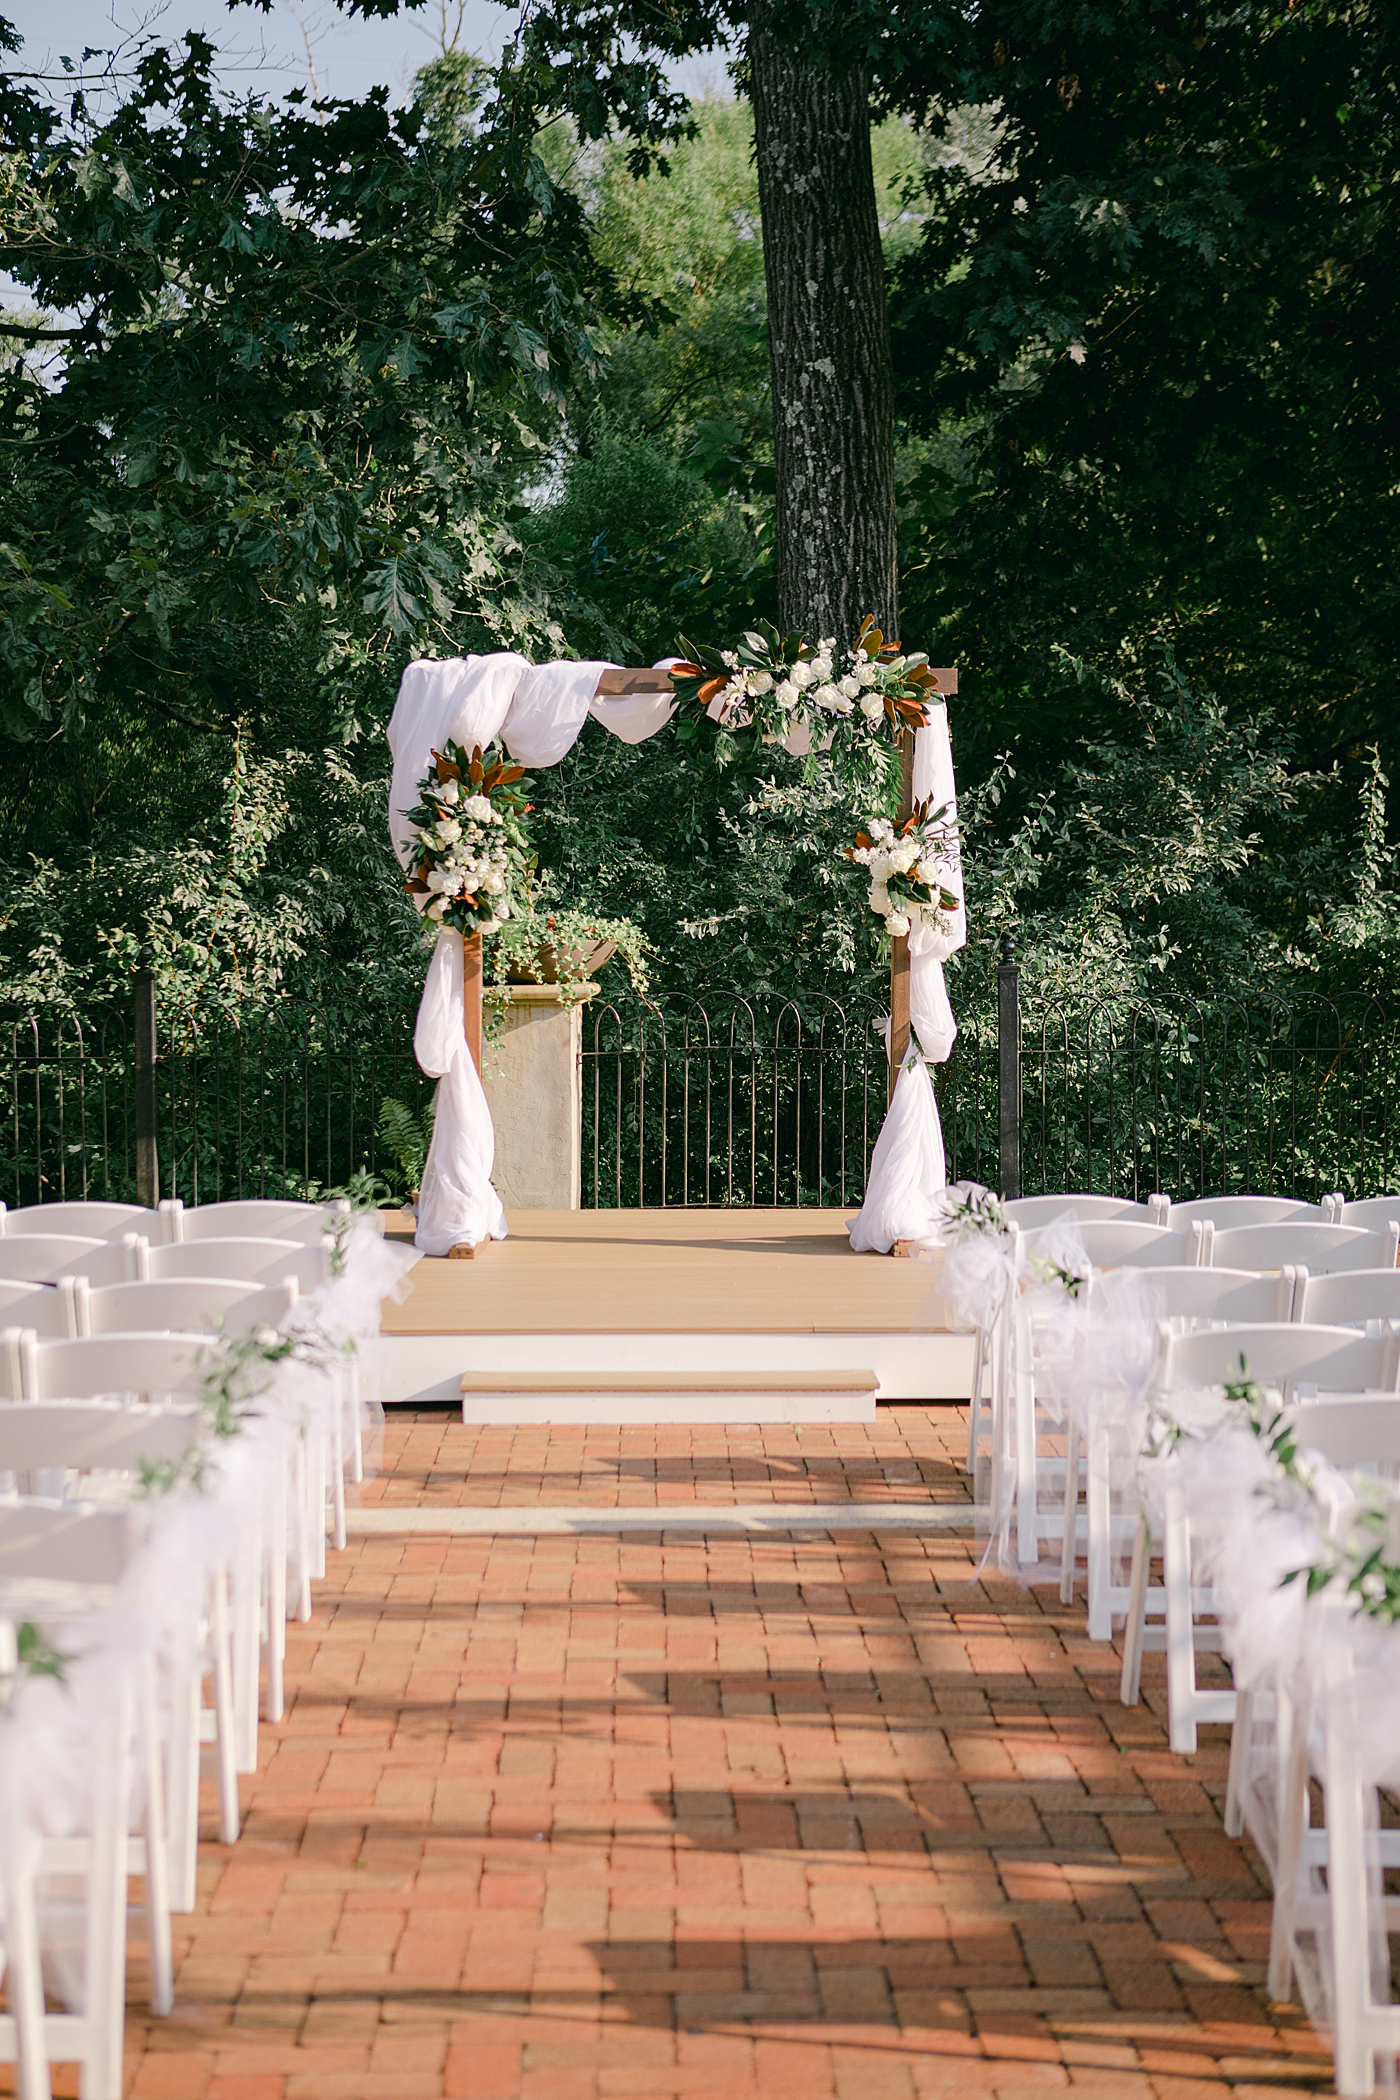 Ceremony location during Hotel du Village Wedding | Image by Hope Helmuth Photography